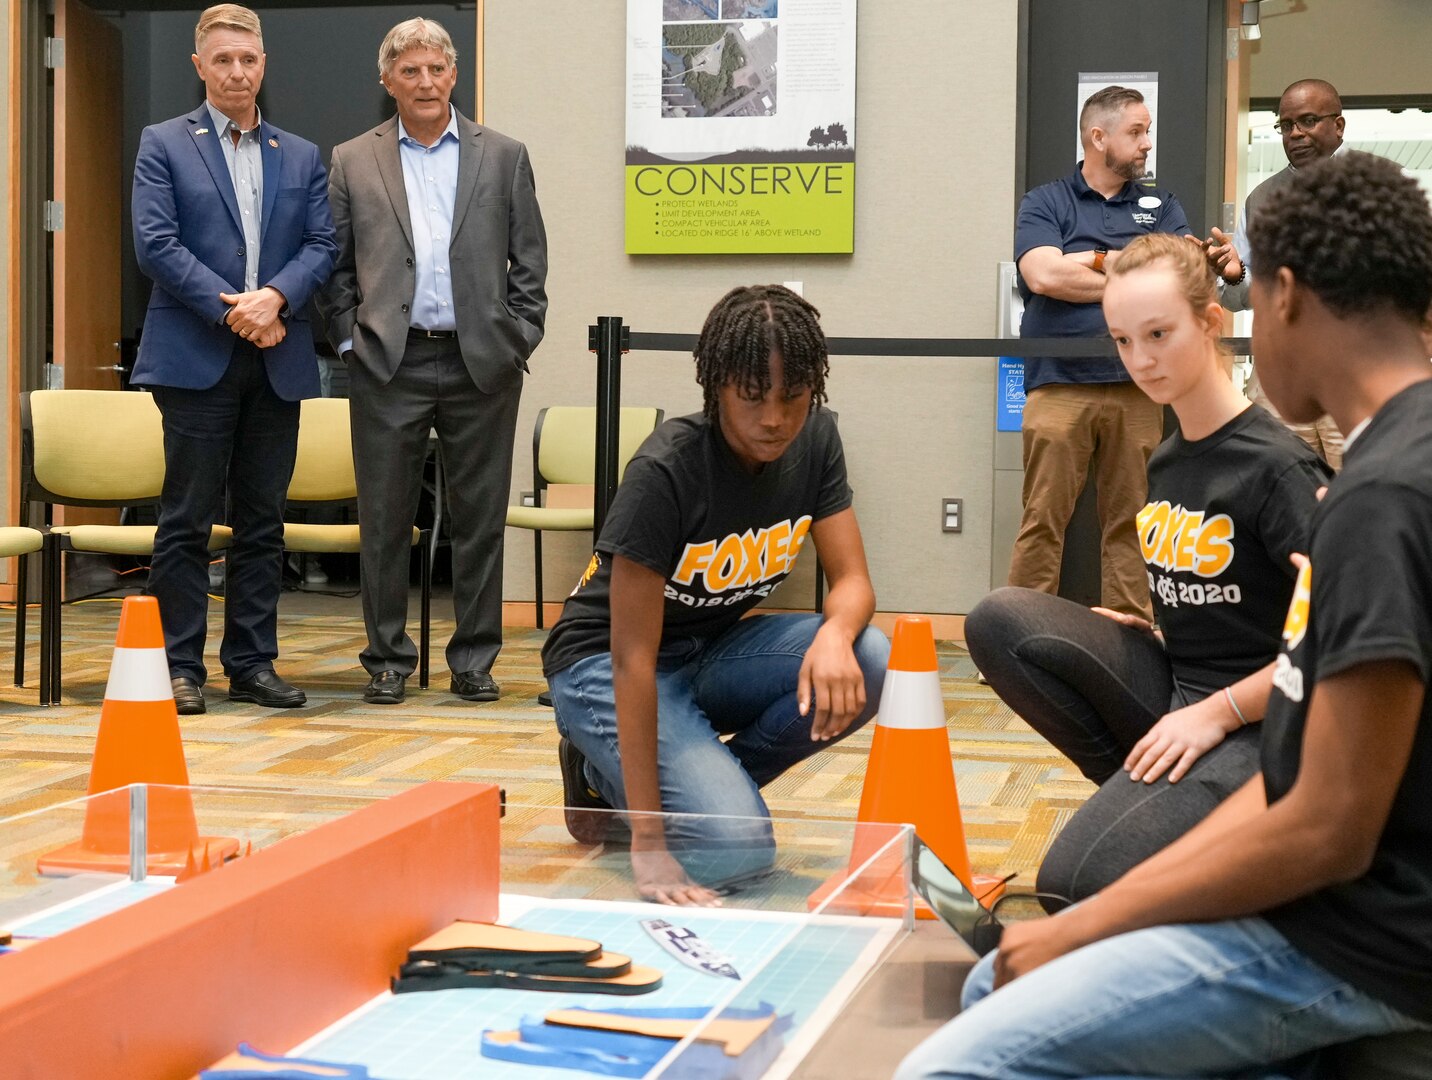 IMAGE: From left, U.S. Rep. Rob Wittman, R-Virginia, and University of Mary Washington's John Burrow watch as a team from King George High School compete in the  Innovation Challenge @Dahlgren, April 30. The robotics competition featured teams from 12 area public, private and governor’s high schools vying for a total of $5000 in cash prizes.